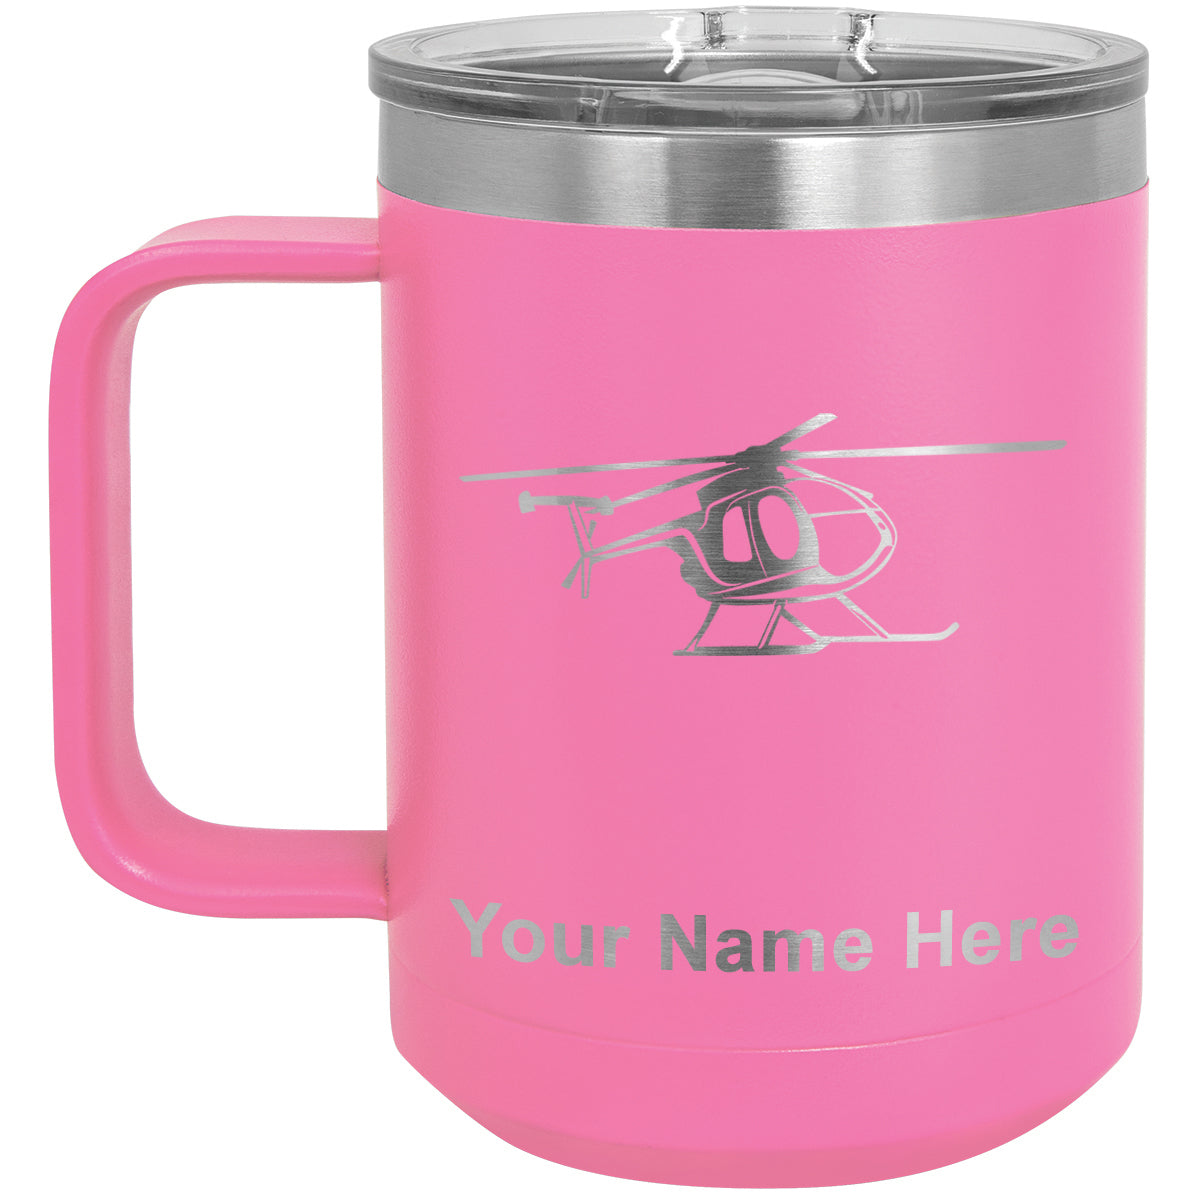 15oz Vacuum Insulated Coffee Mug, Helicopter 1, Personalized Engraving Included